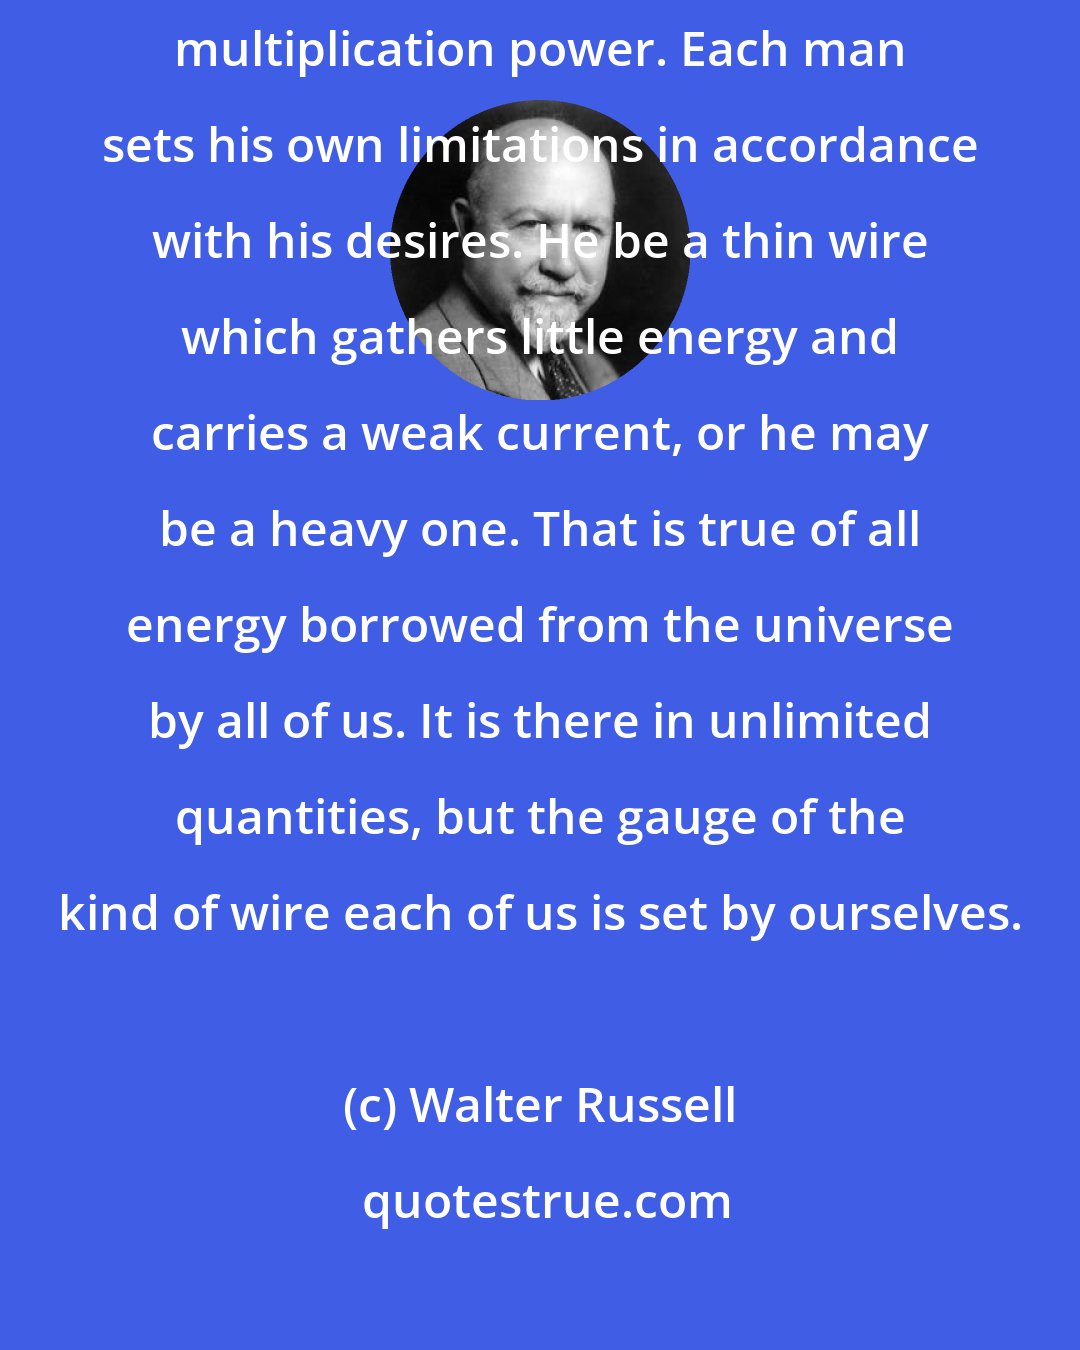 Walter Russell: There are no limitations set by this electric universe upon any man's multiplication power. Each man sets his own limitations in accordance with his desires. He be a thin wire which gathers little energy and carries a weak current, or he may be a heavy one. That is true of all energy borrowed from the universe by all of us. It is there in unlimited quantities, but the gauge of the kind of wire each of us is set by ourselves.